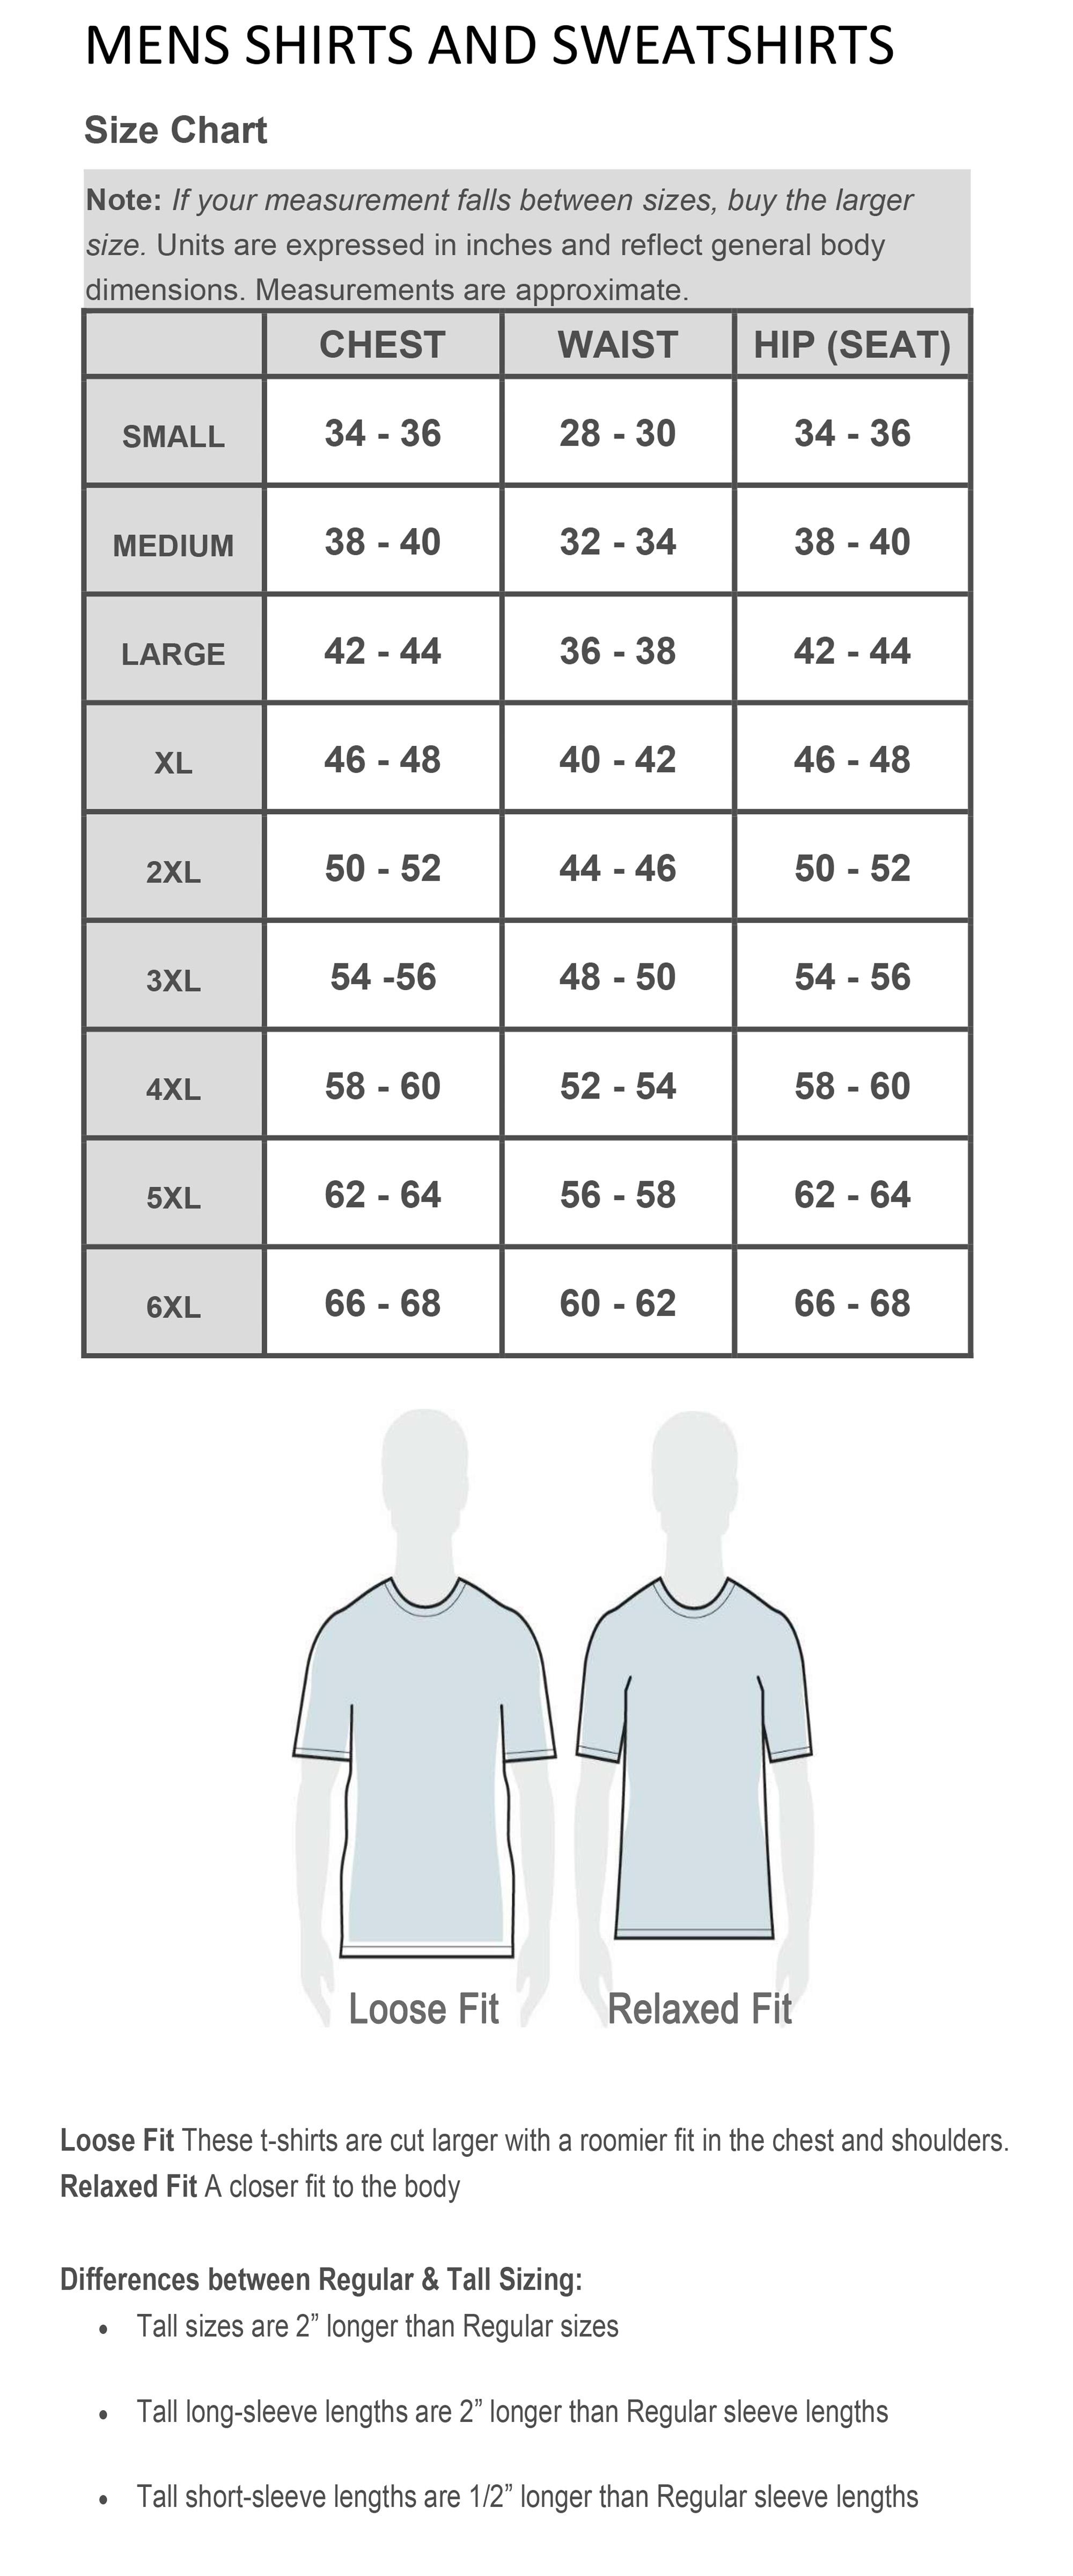 Apparell Sizing Charts